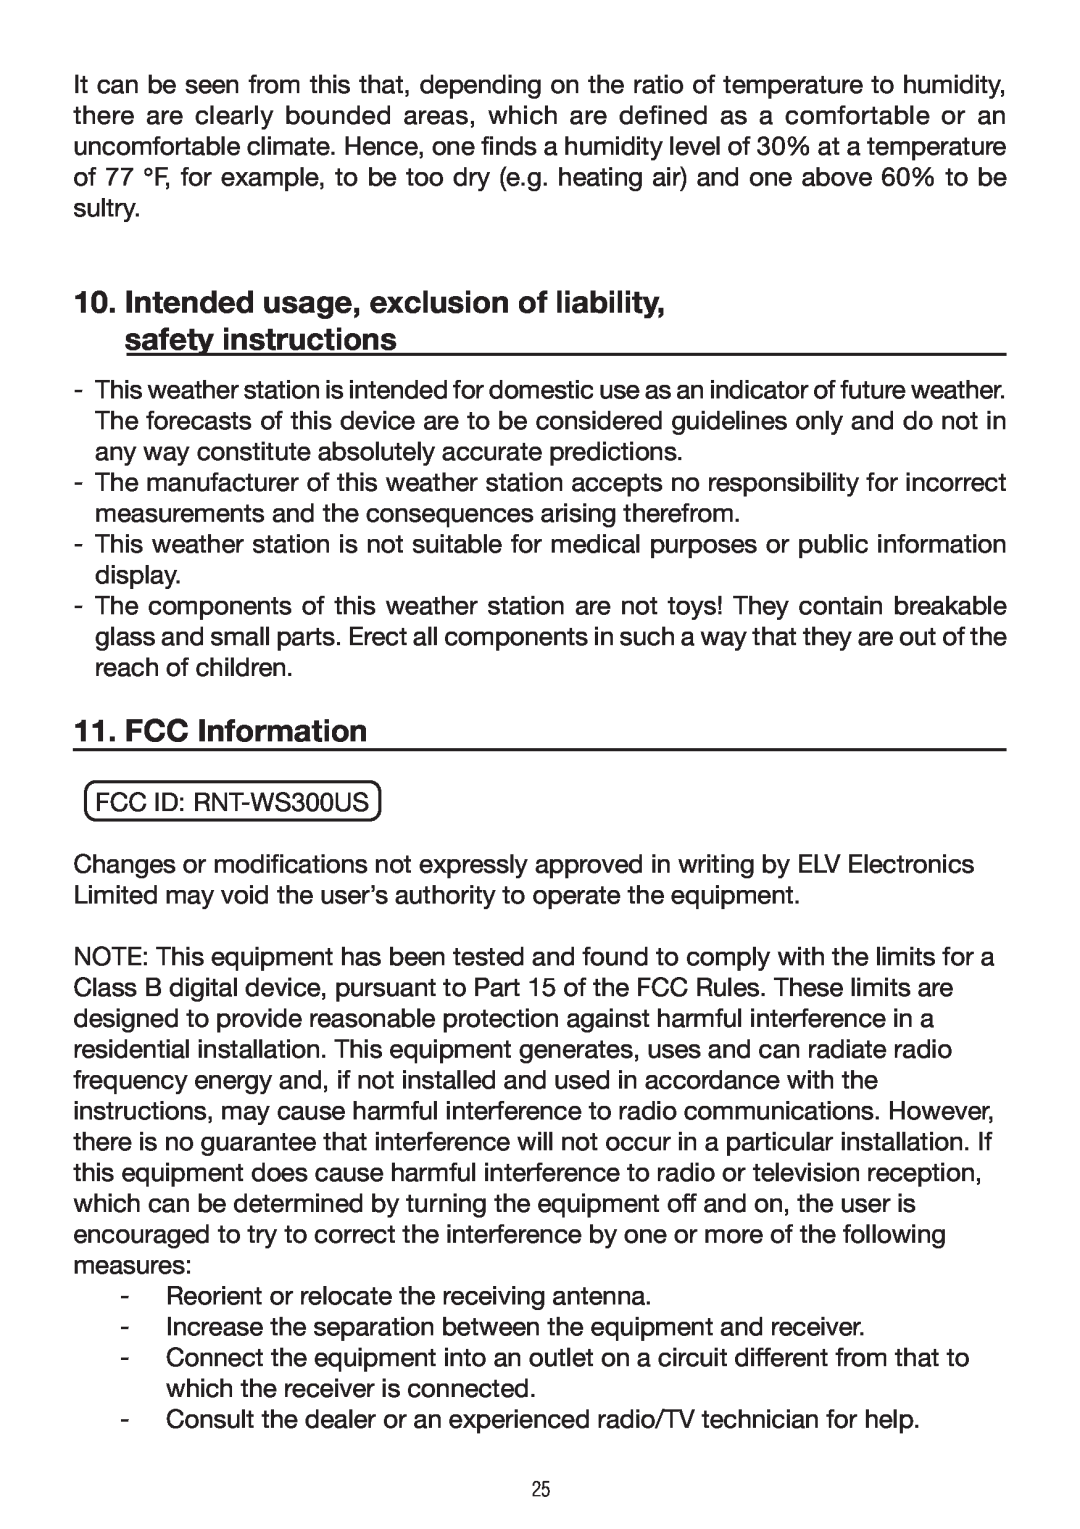 P3 International E 9300 operating instructions Intended usage, exclusion of liability, safety instructions, FCC Information 